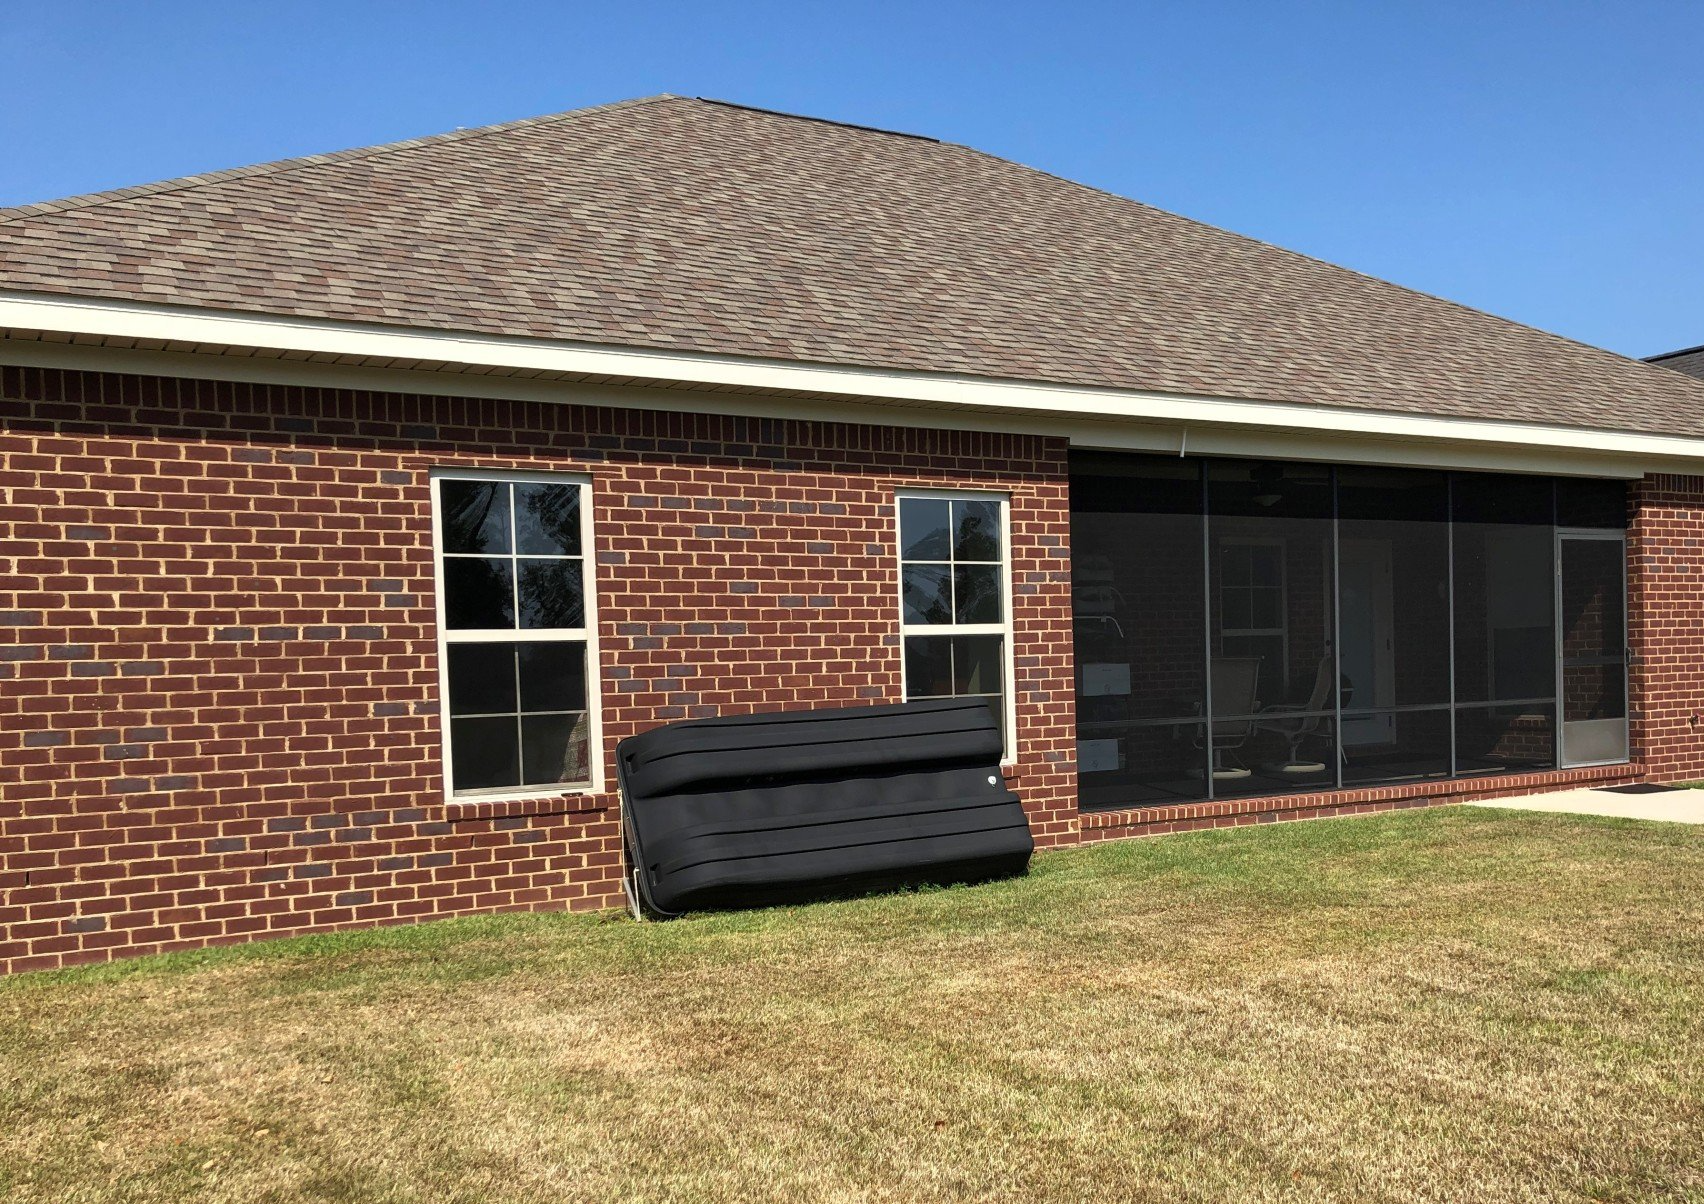 Residential Tint installation service Dothan Alabama - Home Window Tinting in Dothan, AL on 9.19.2019